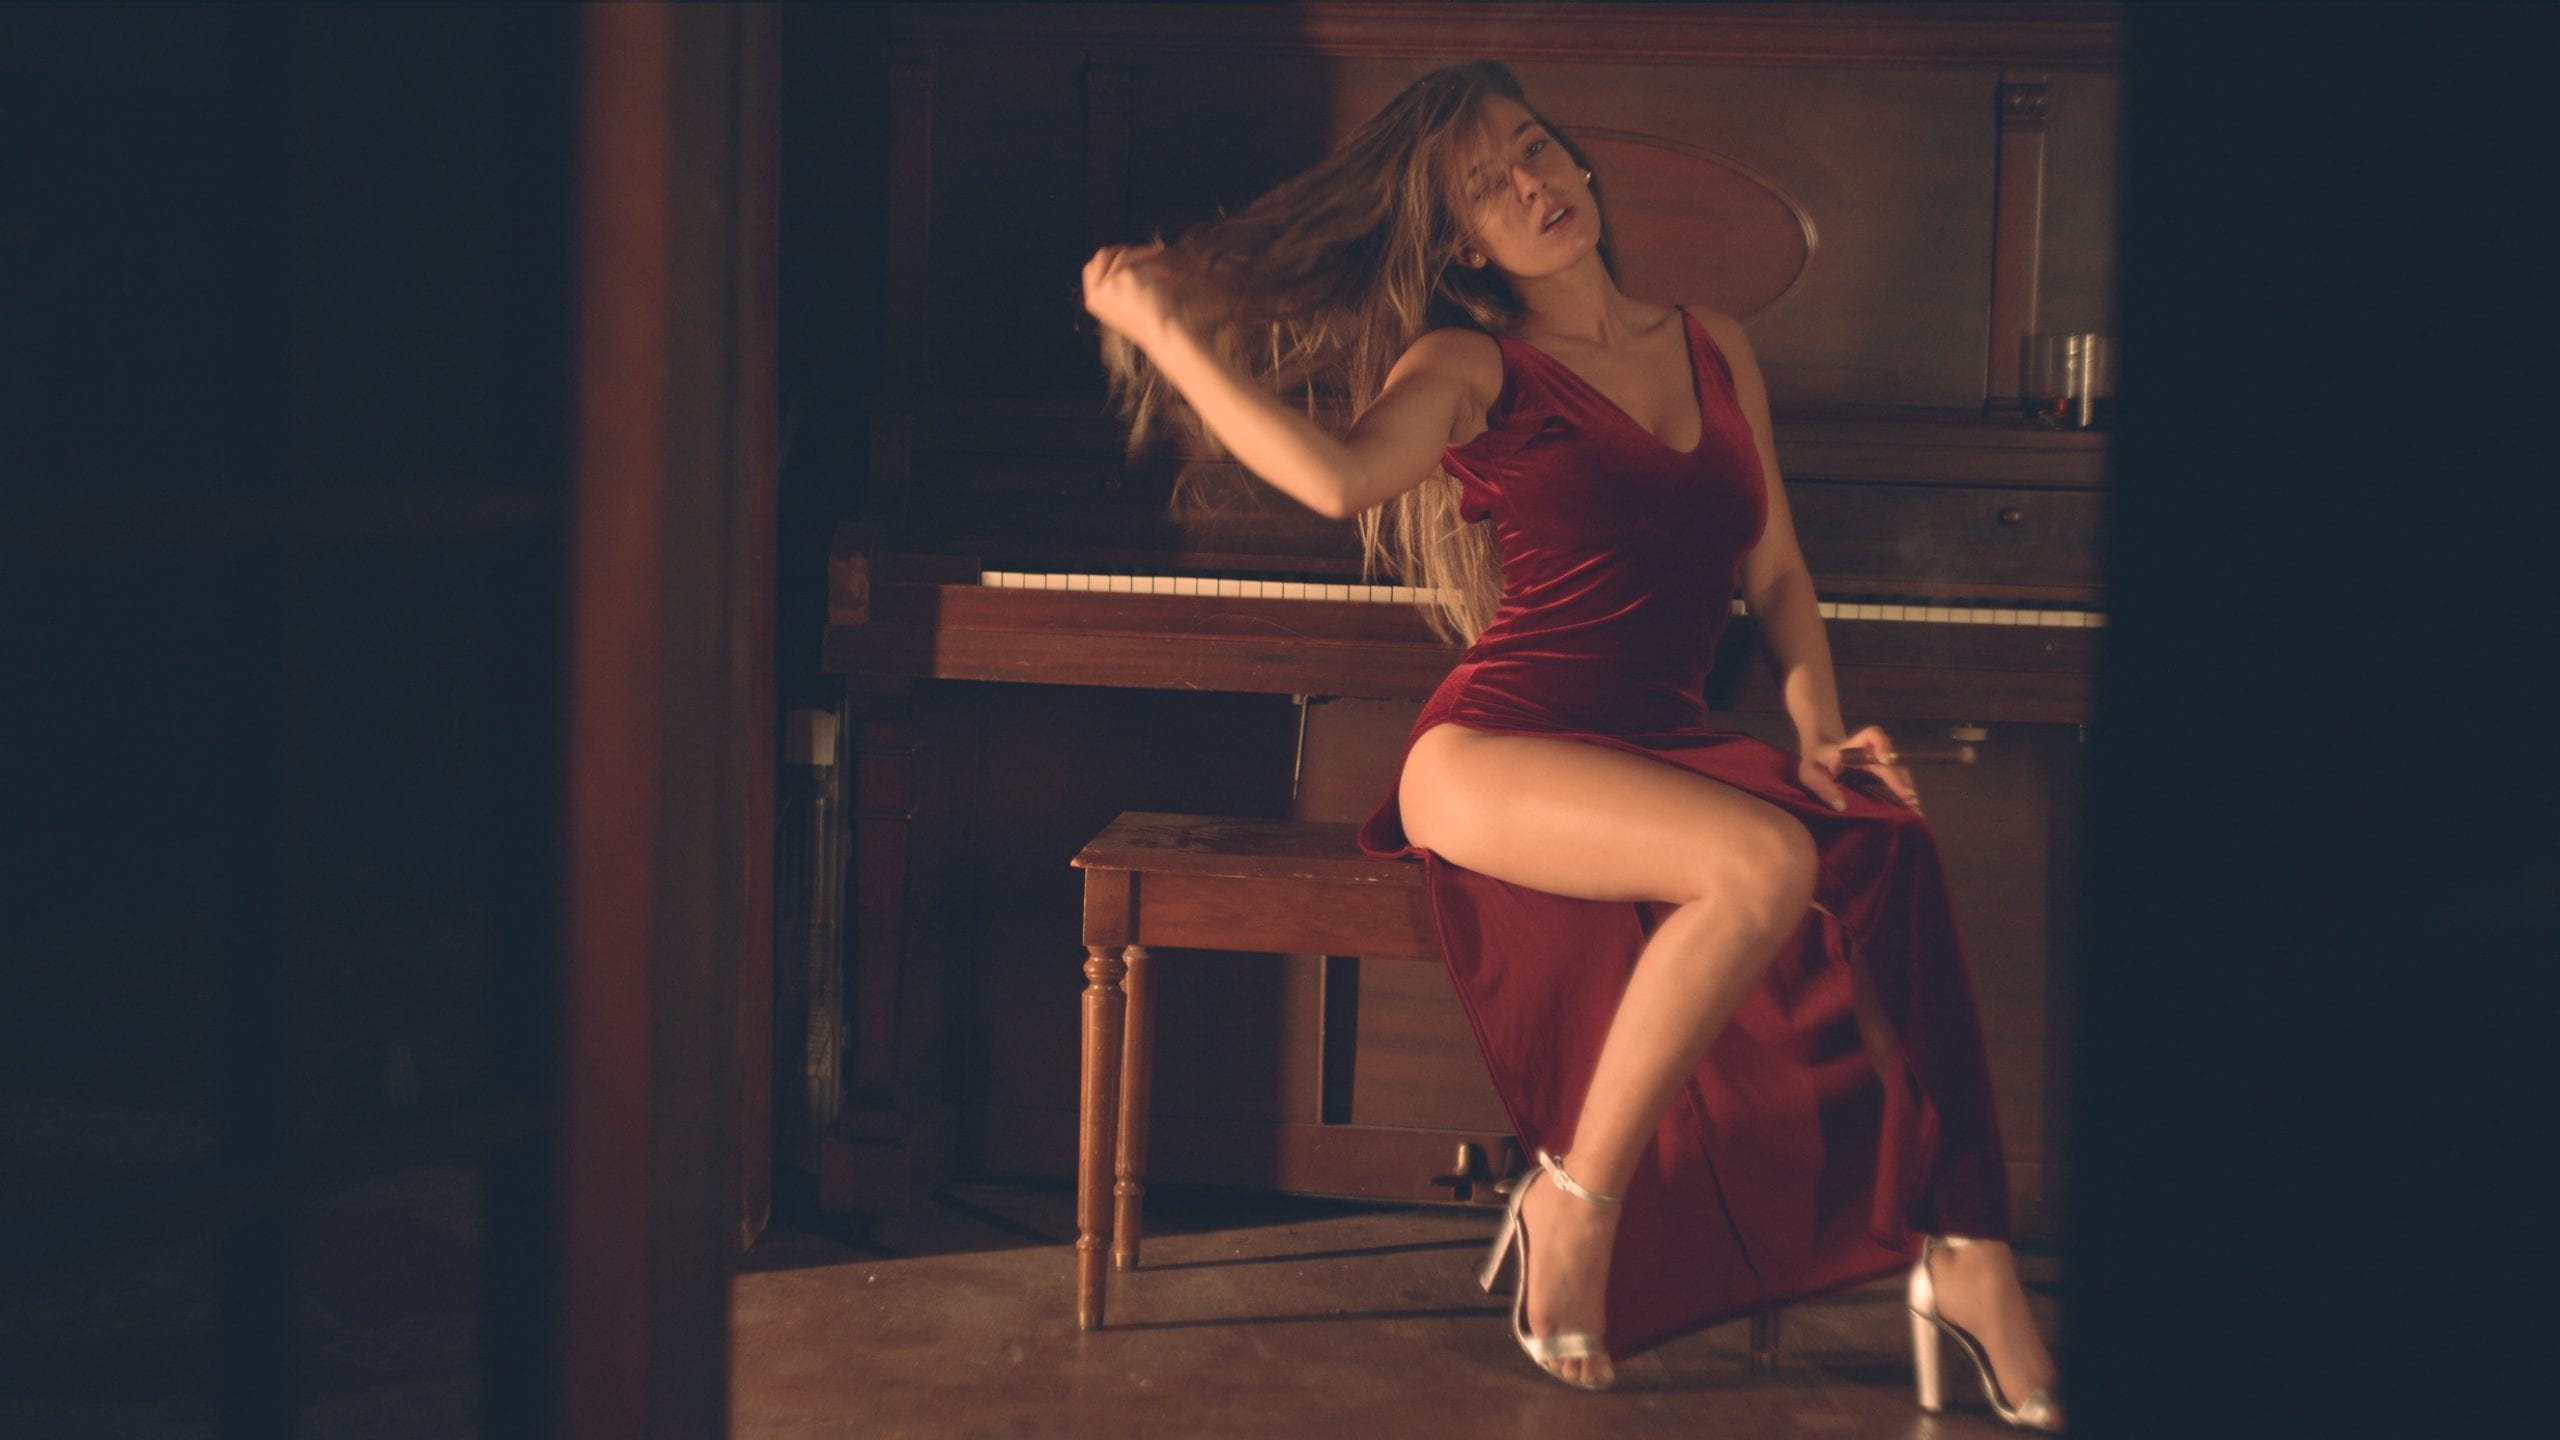 Sabela Model posing for camera sitting at a piano wearing a red dress and high heels holding a cigar